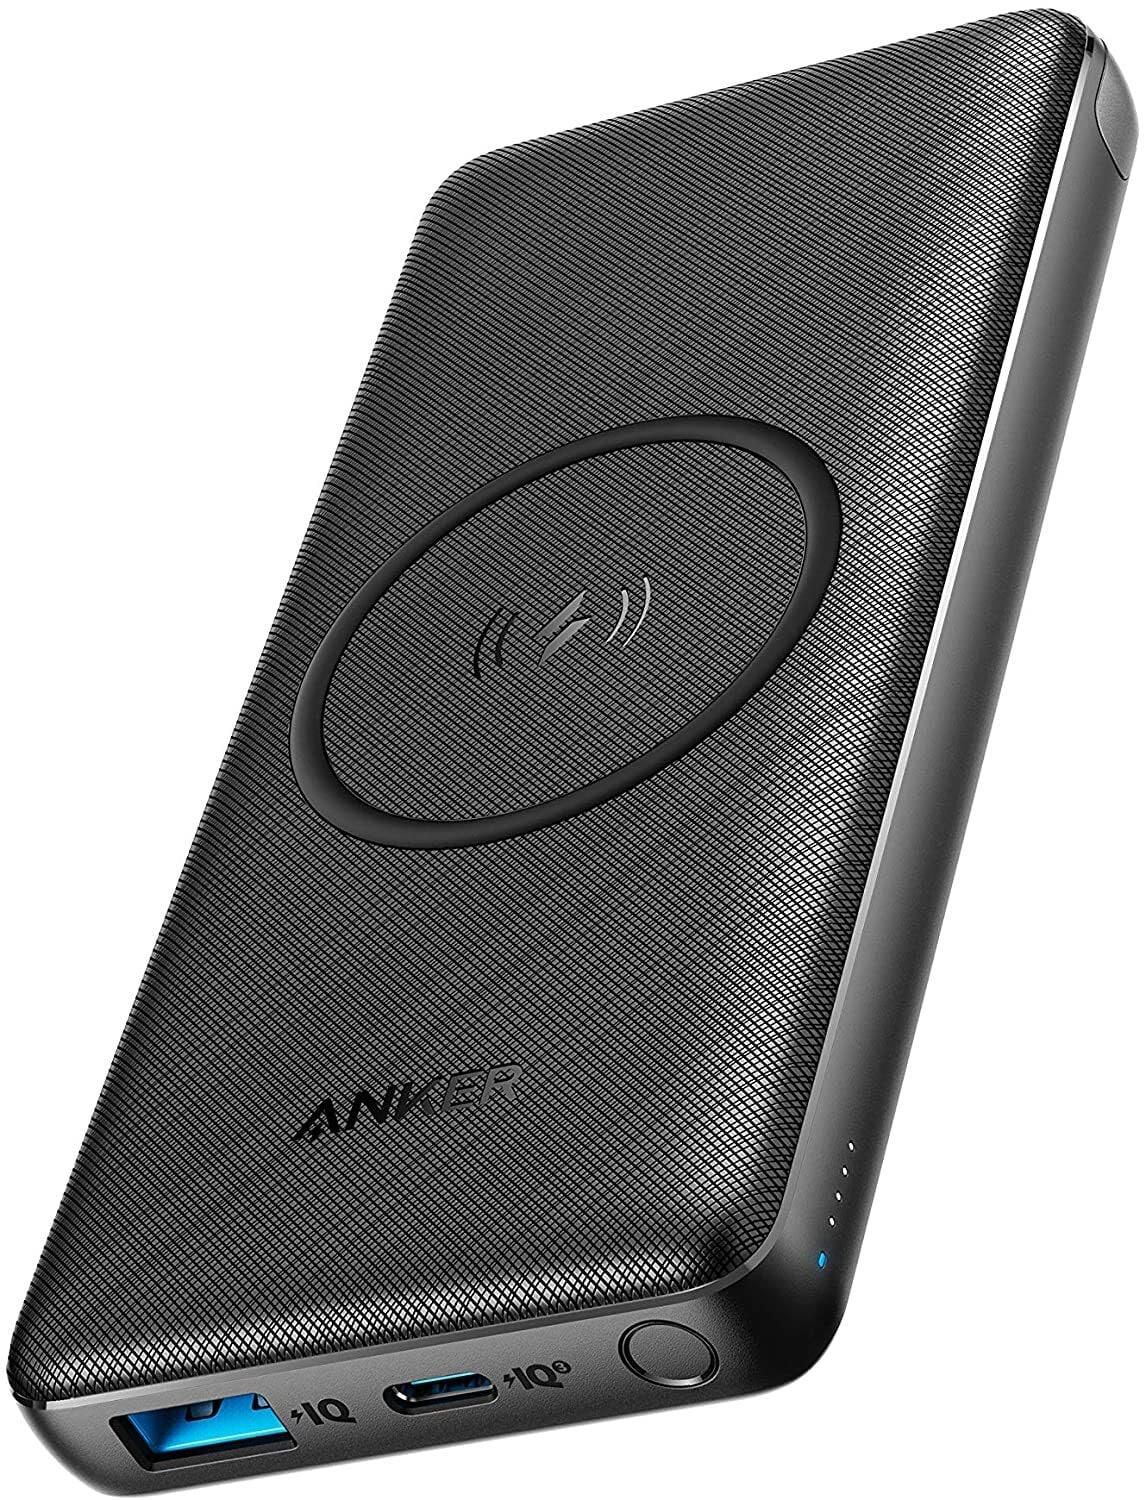 Anker Wireless Power Bank 10,000mAh, PowerCore III 10K Wireless Portable Charger with Qi-certified 10W Wireless Charging and 18W USB-C Quick Charge for iPhone 12, Pro, Pro Max, 11, Pro, iPad